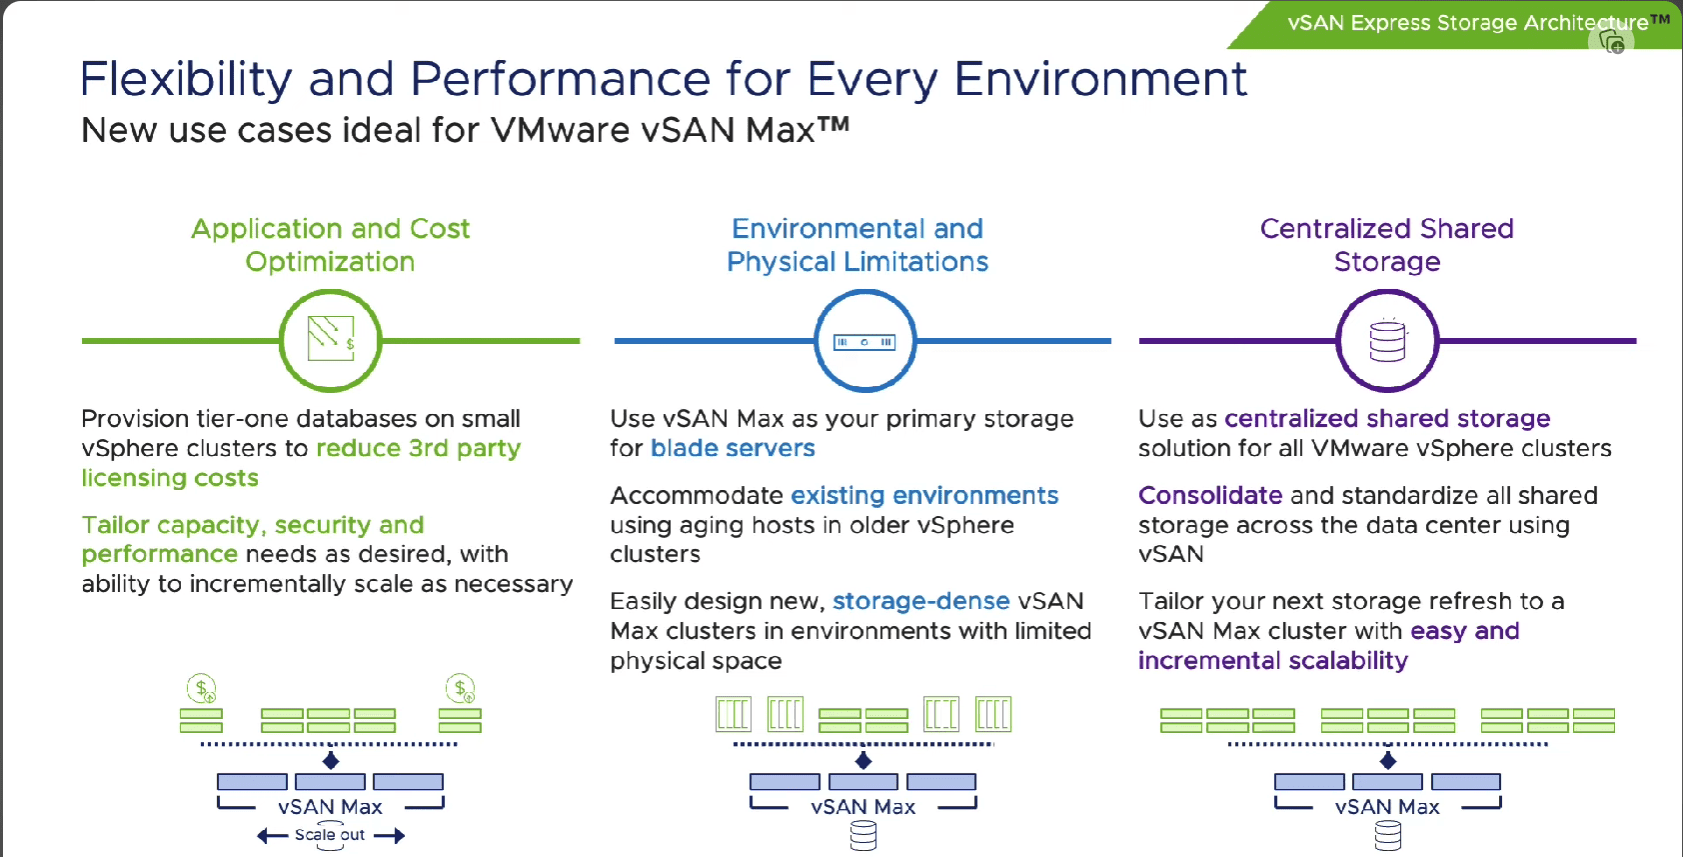 Flexibility and performance with vsan max